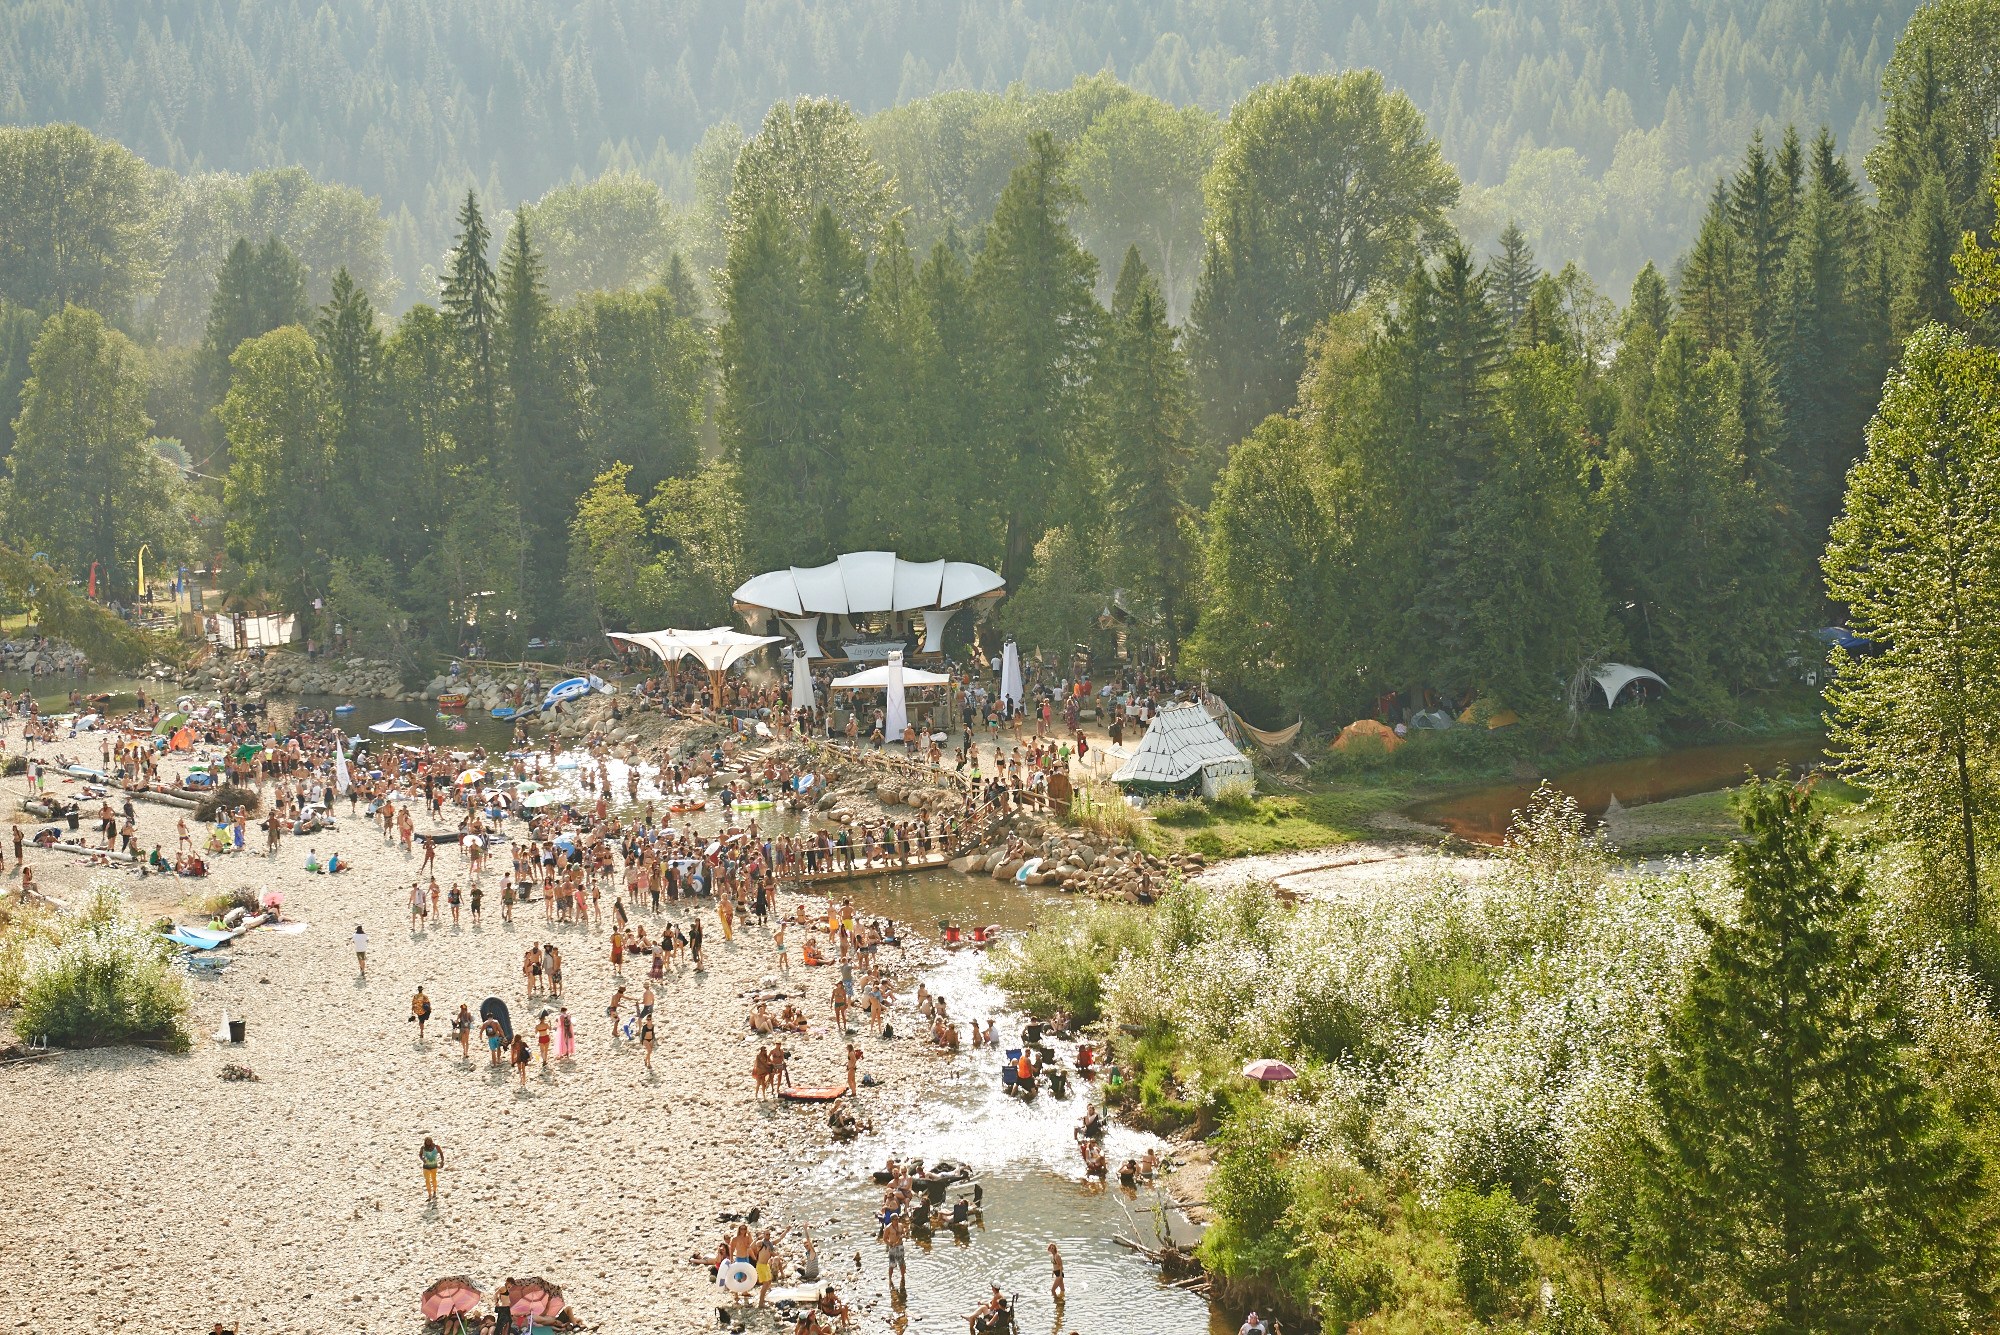 Shambhala Music Festival Announces Early Closure Due To WildFires